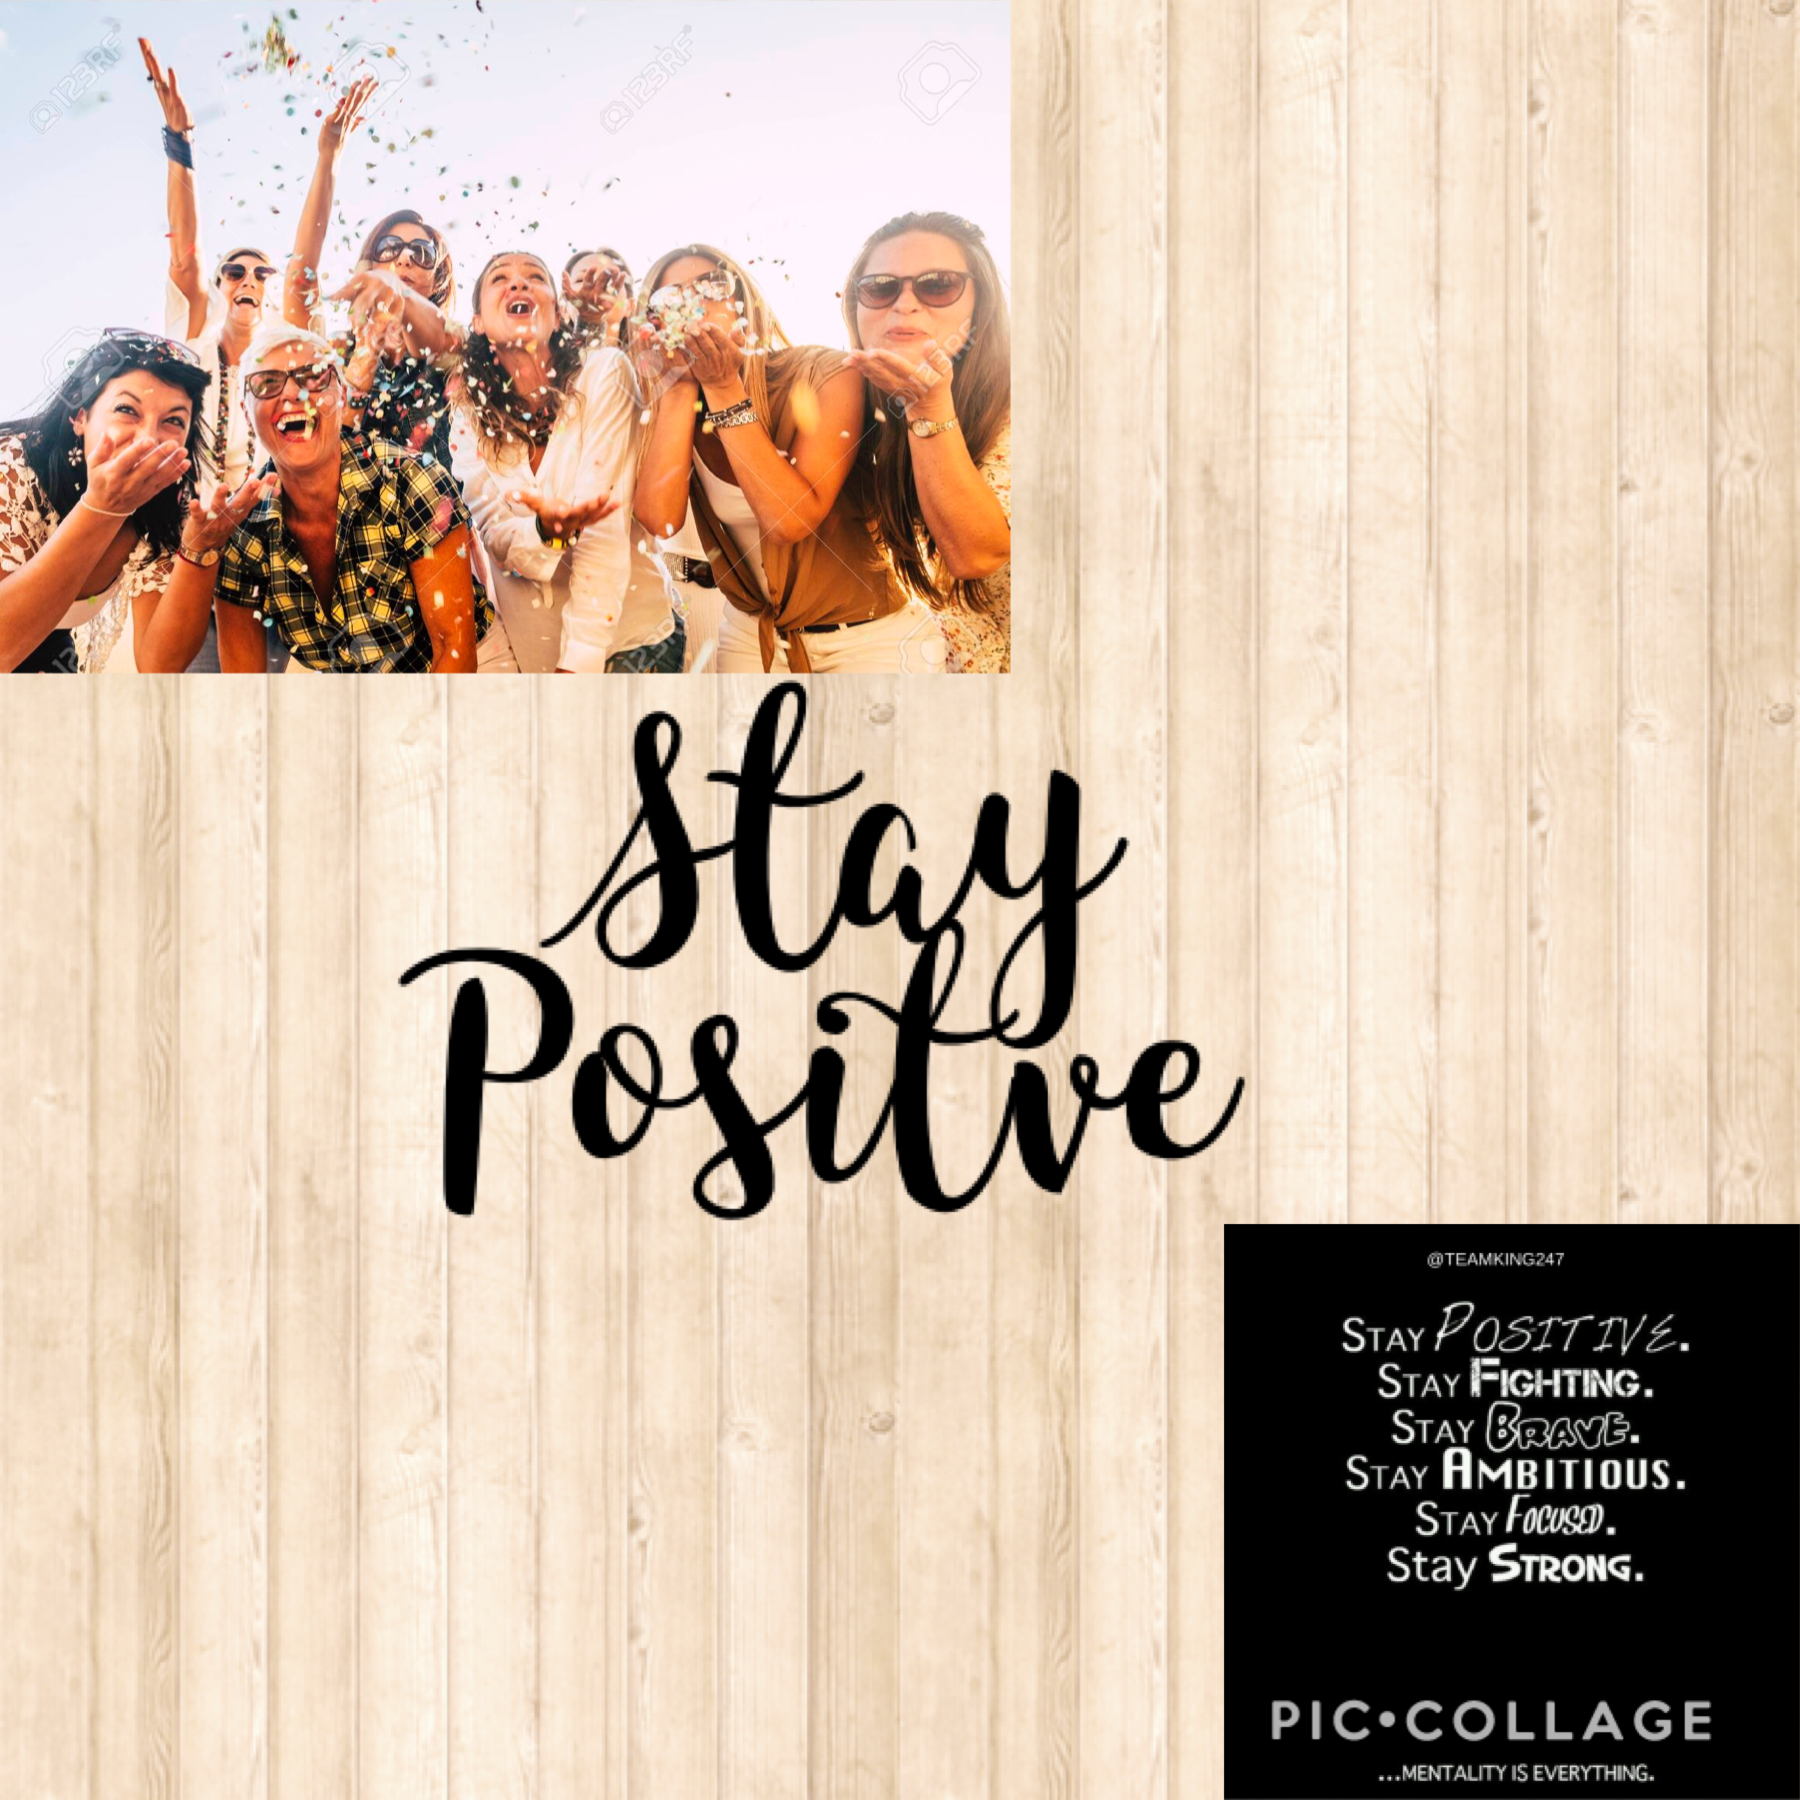 #Stay Positive